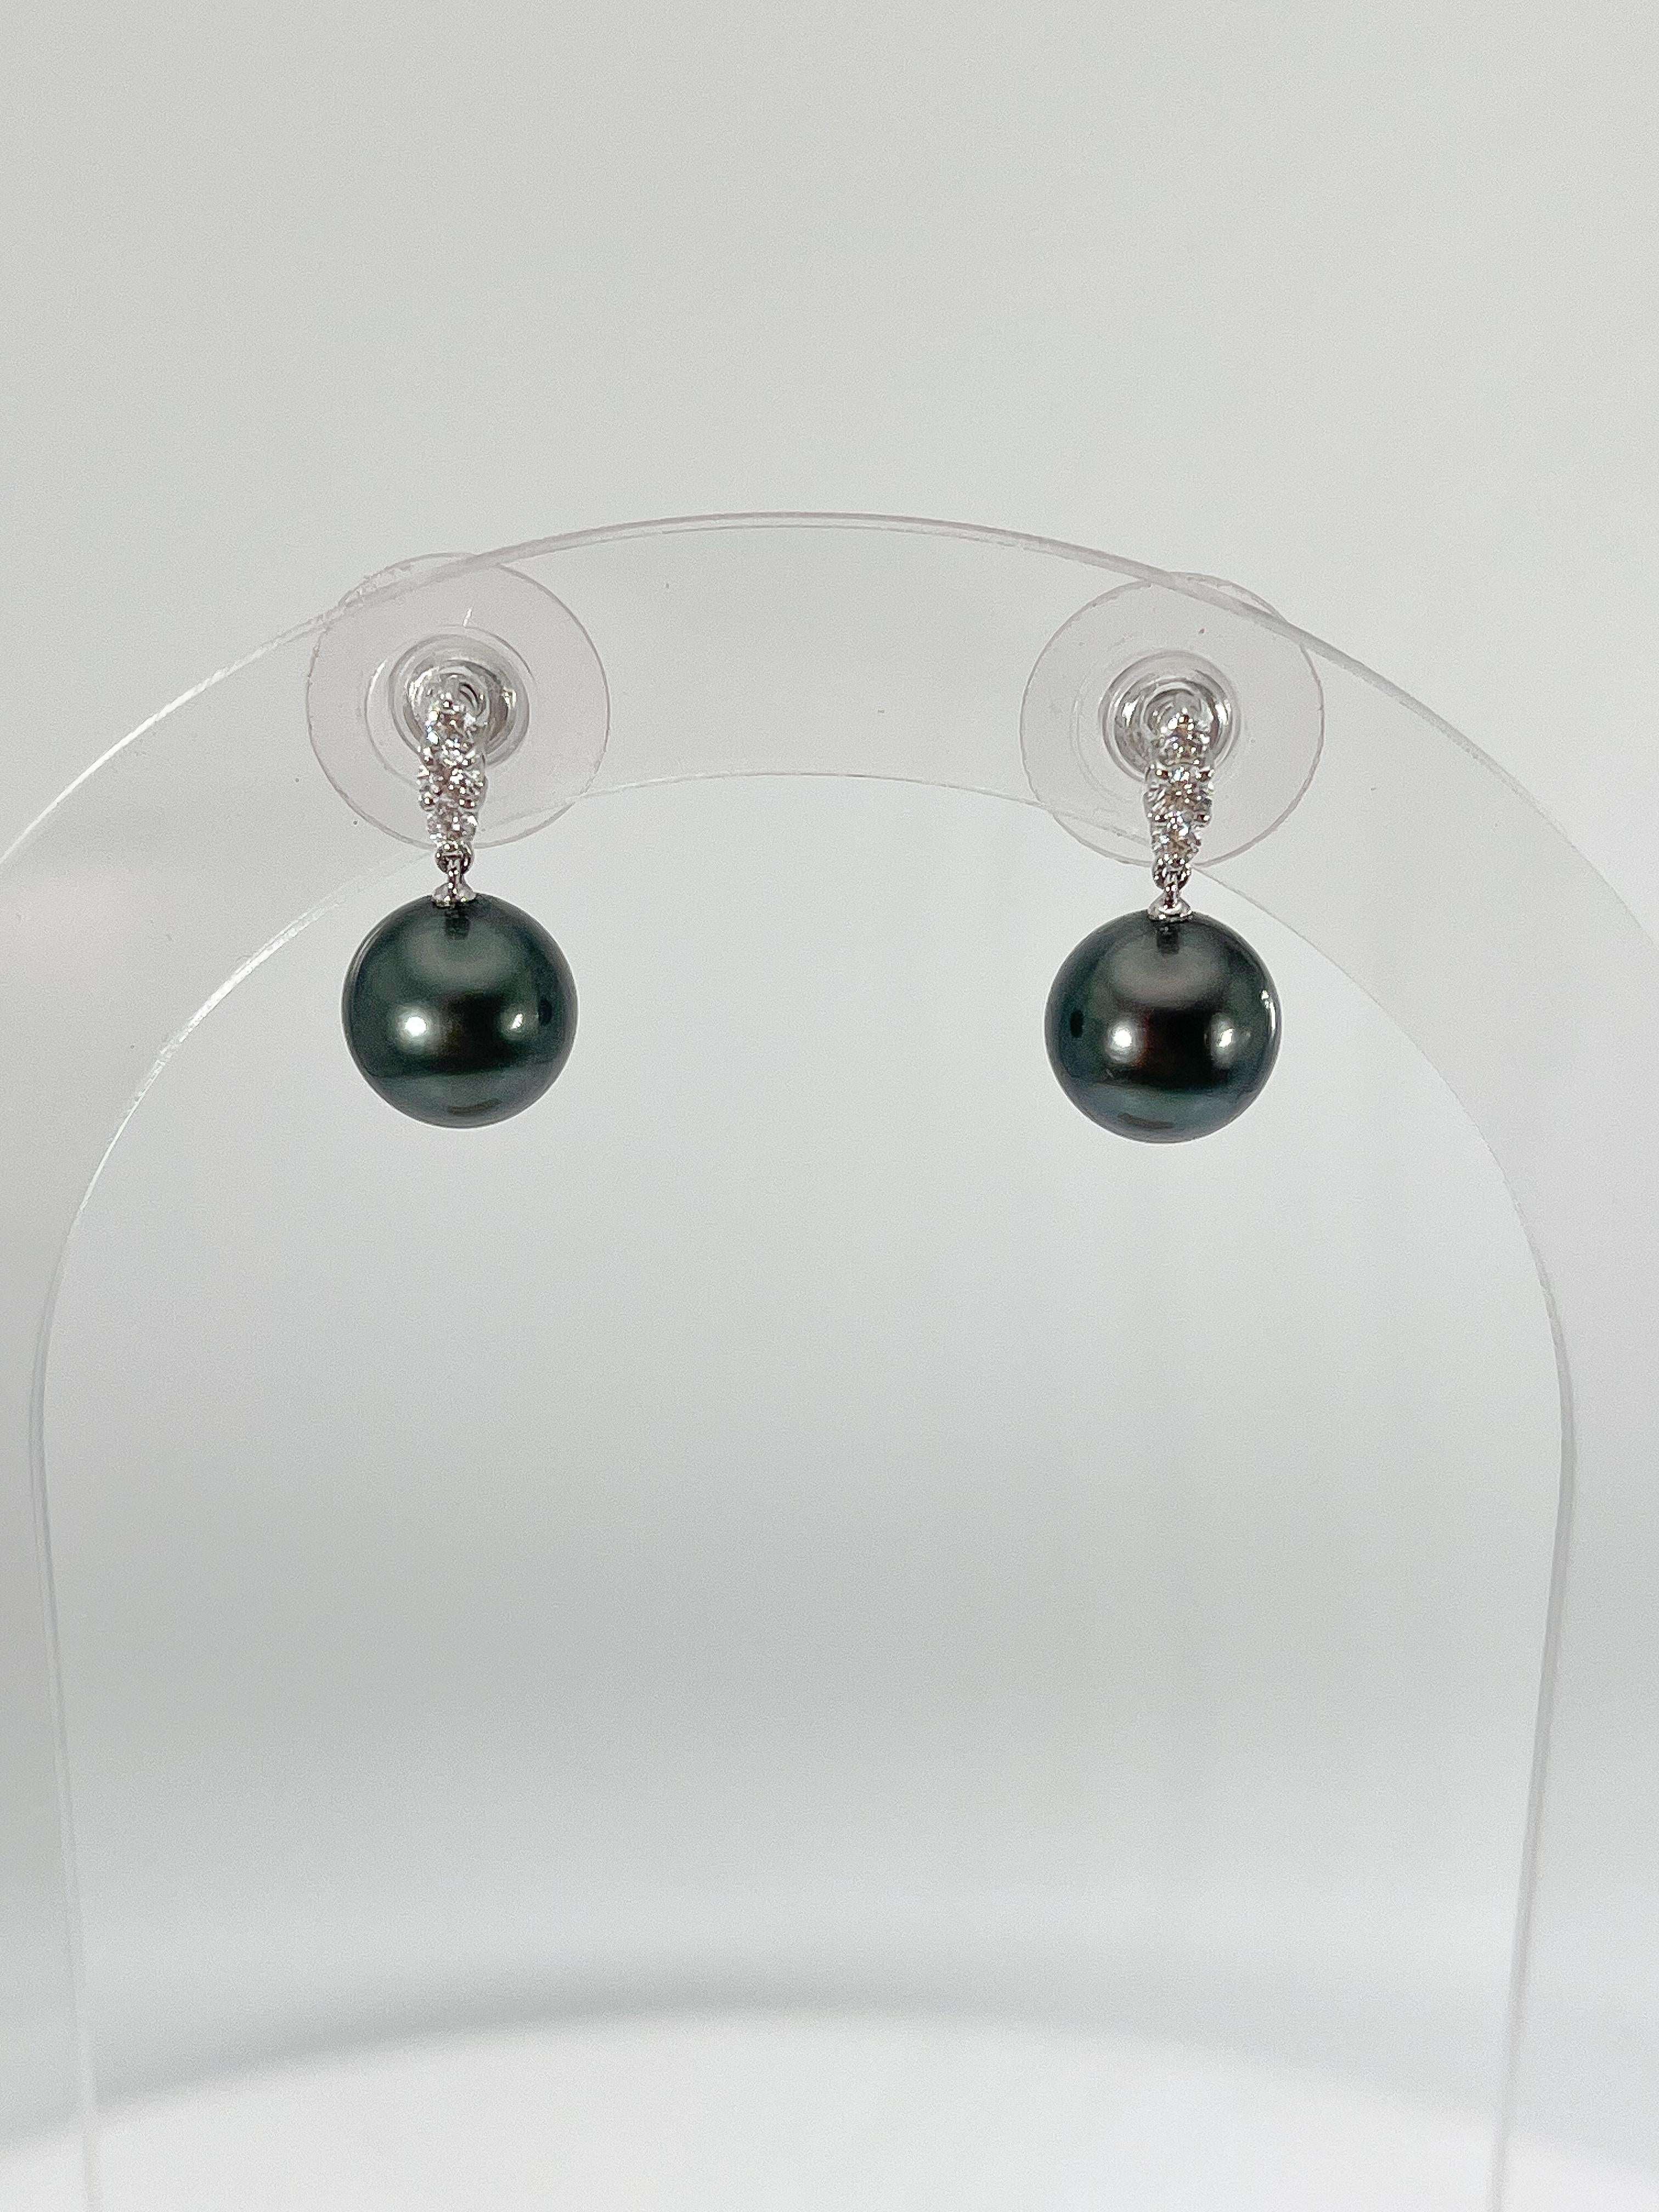 14k white gold Tahitian pearl and .15 CTW diamond earrings. The diamonds in these earrings are all round, the length of these earrings are 17.3 mm, they have a width of 9 mm, and they have a total weight of 3.07